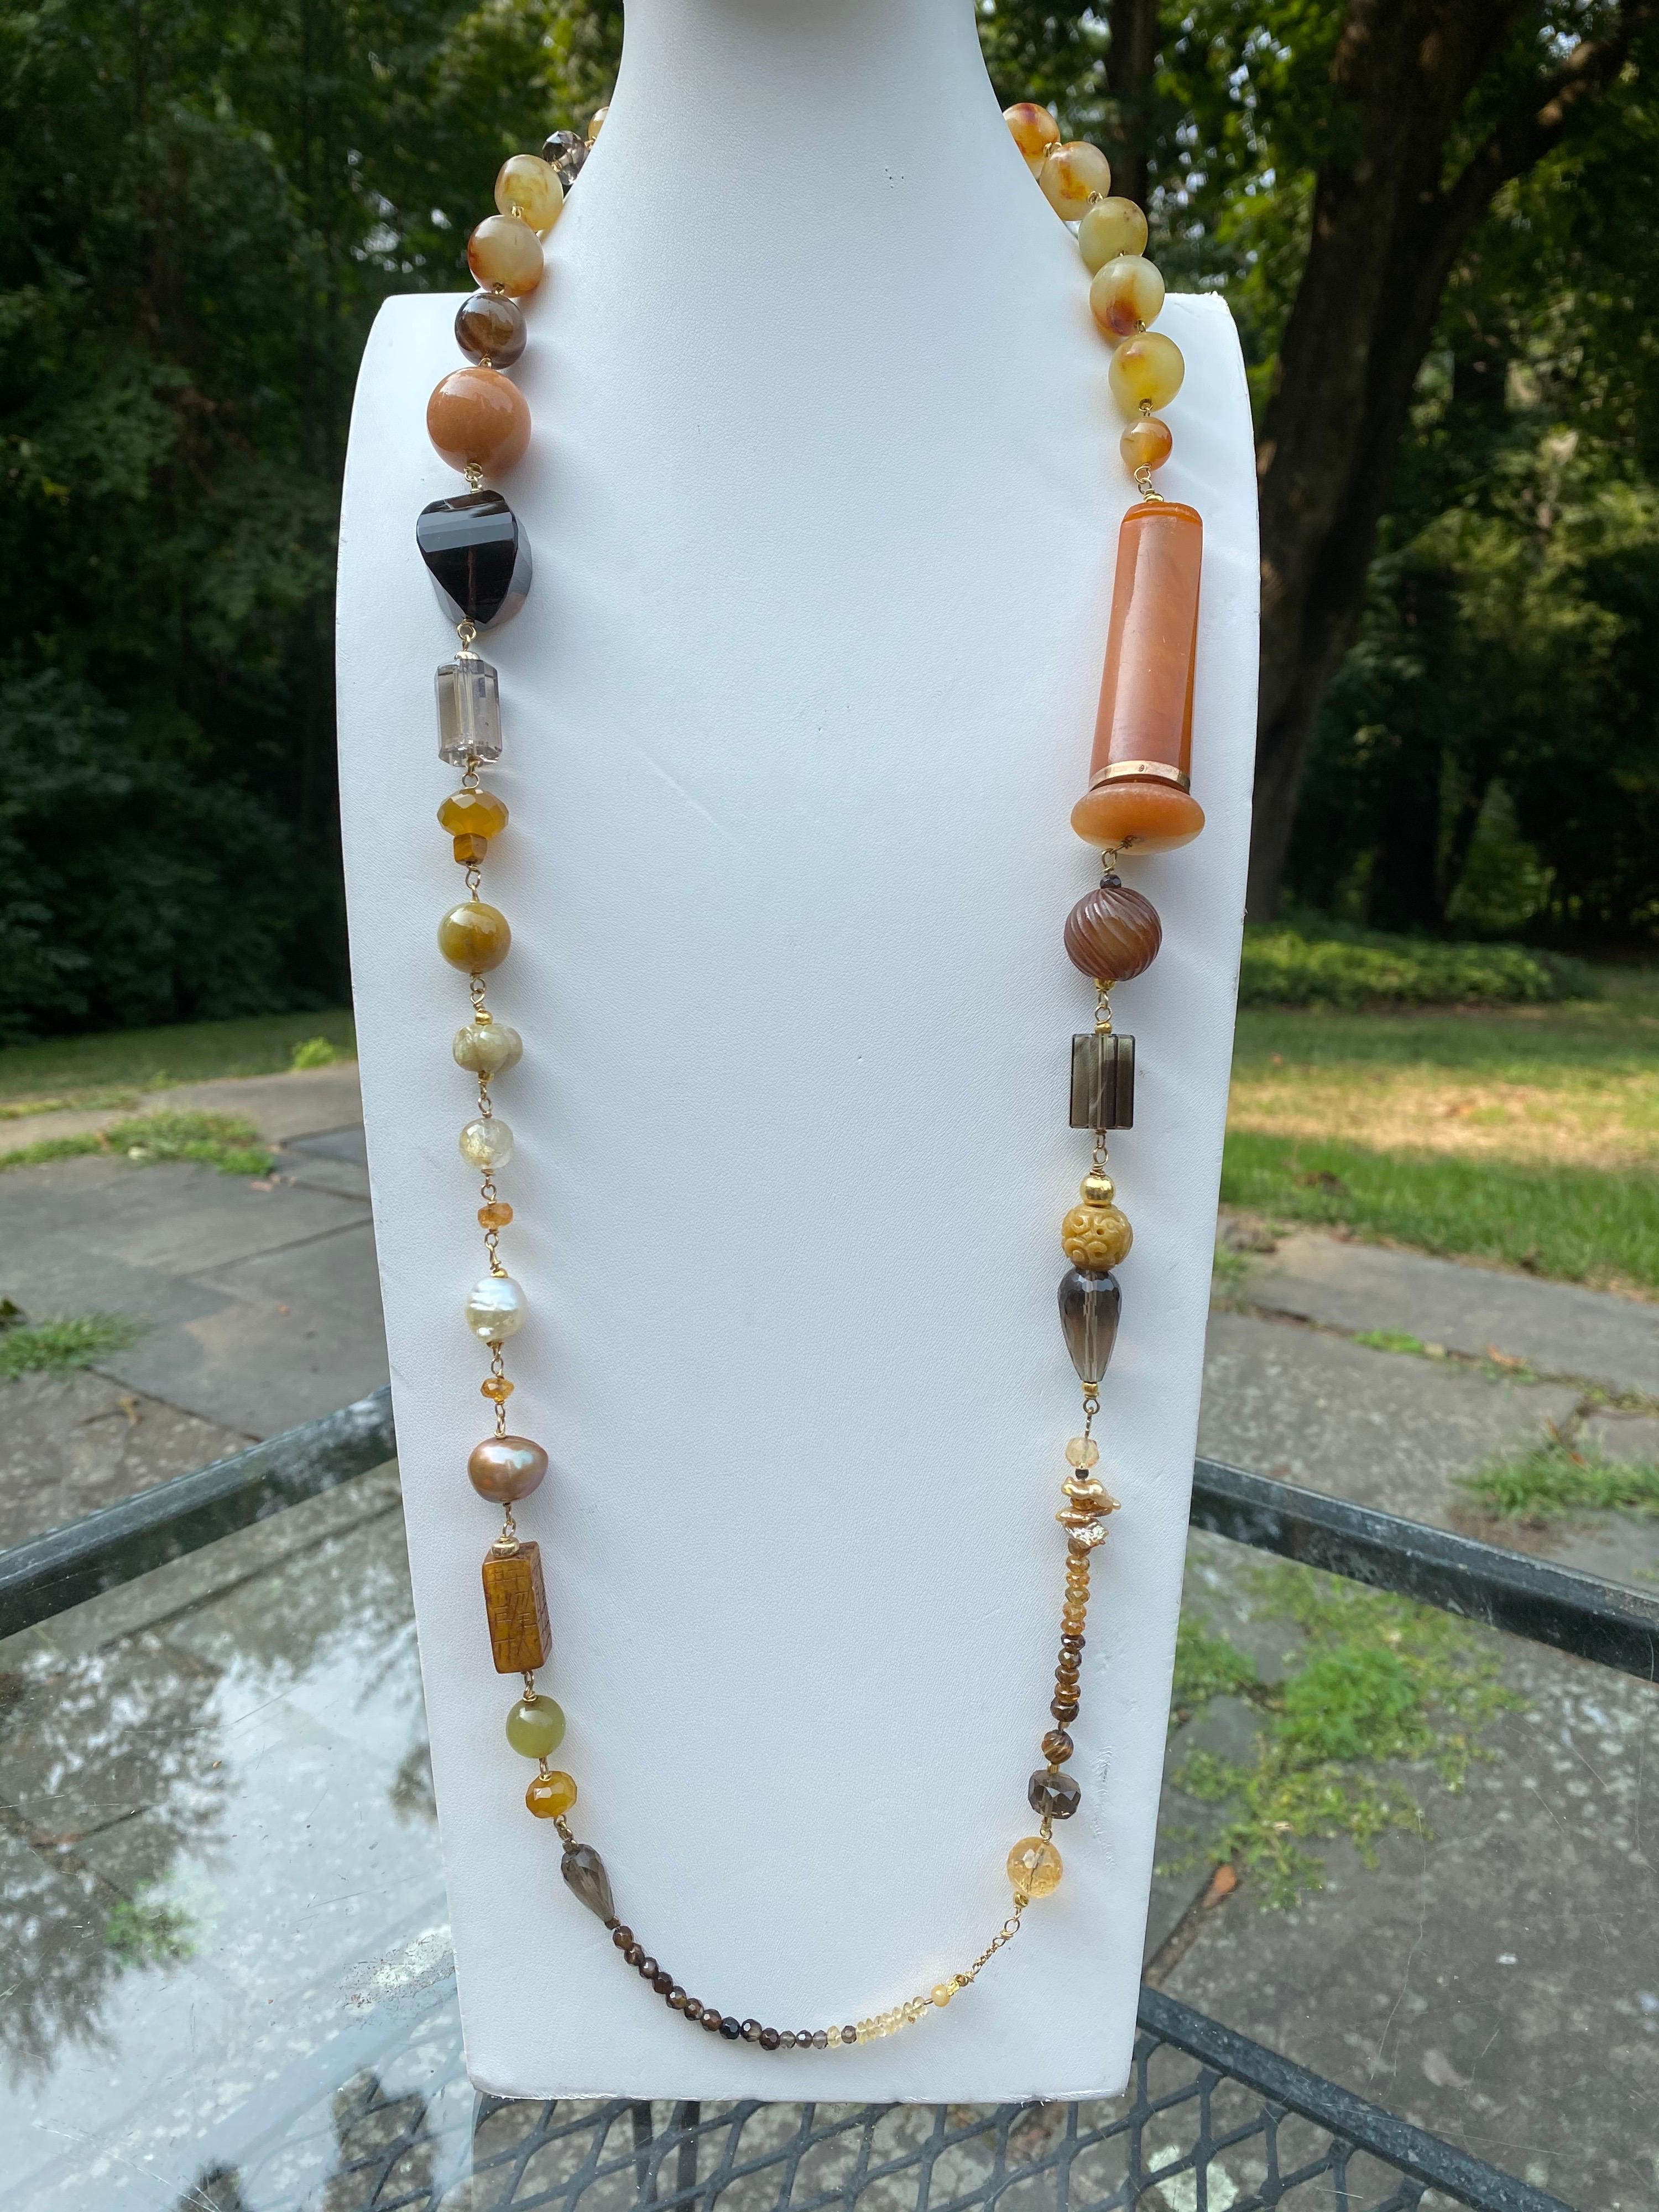 This is a one of a kind necklace by the award-winning design Jane Magon Collections, It consists of Handcarved Burmese Jade, Honey Jade, South Sea Pearls, Faceted Smokey Quartz, Mexican Fire Opal, Citrines, Agates, and a Vintage Amber Cigarette